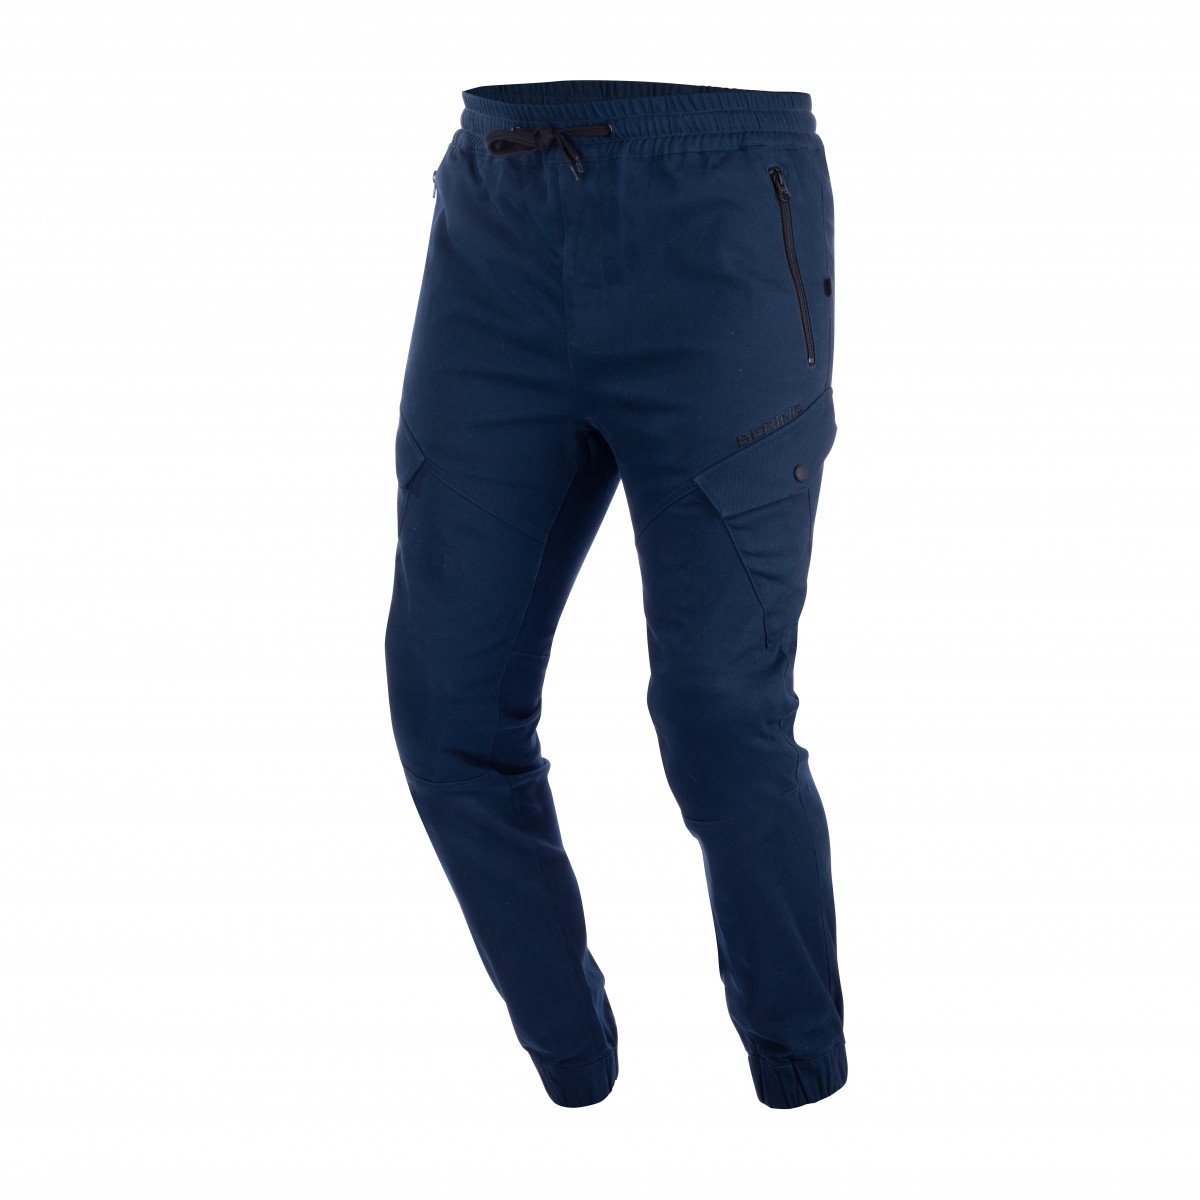 Image of Bering Trousers Richie Navy Blue Size S ID 3660815167809